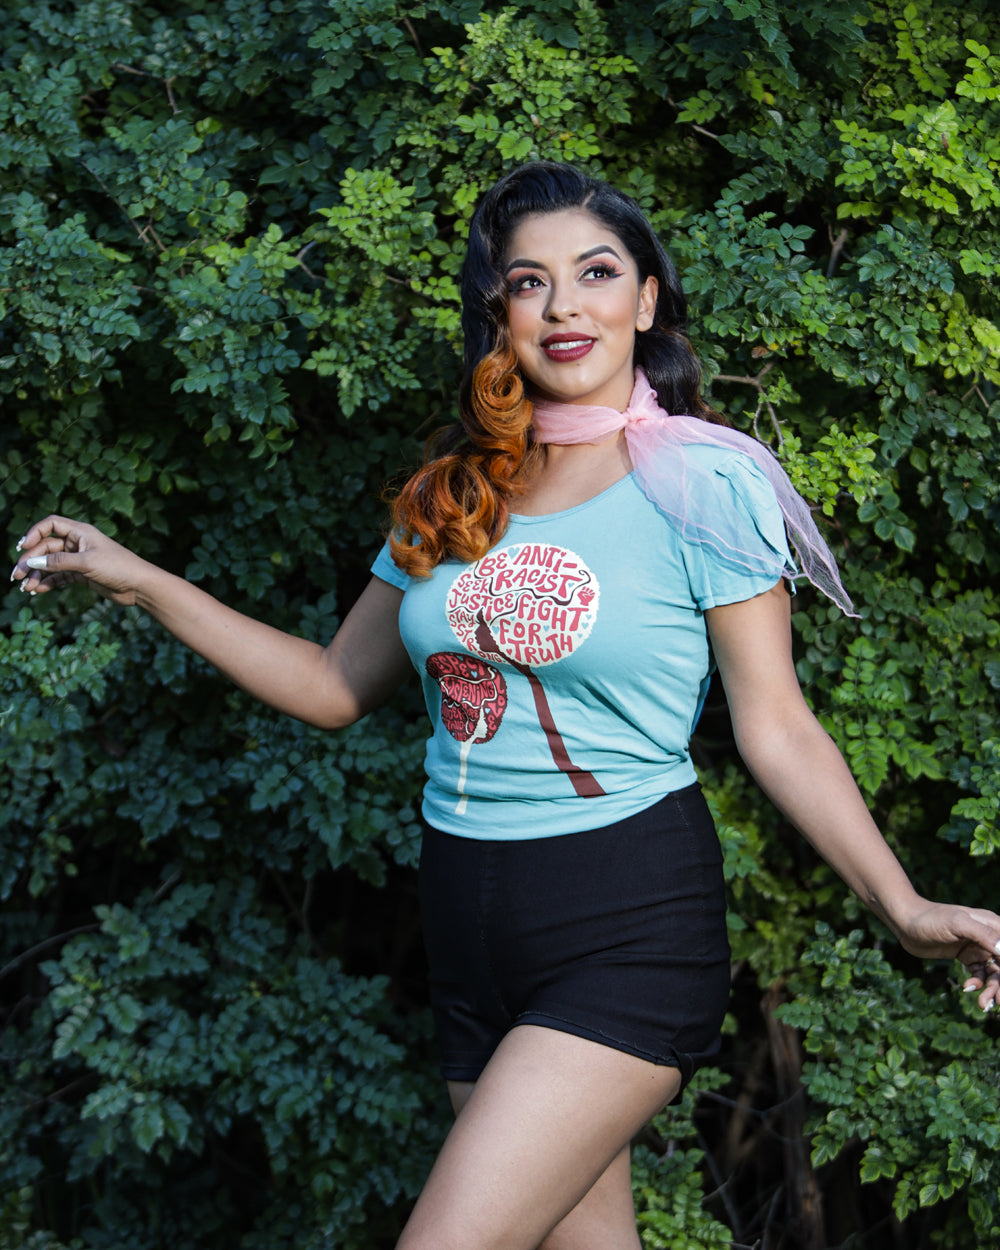 Latina model wearing blue shirt with anti-racist messages